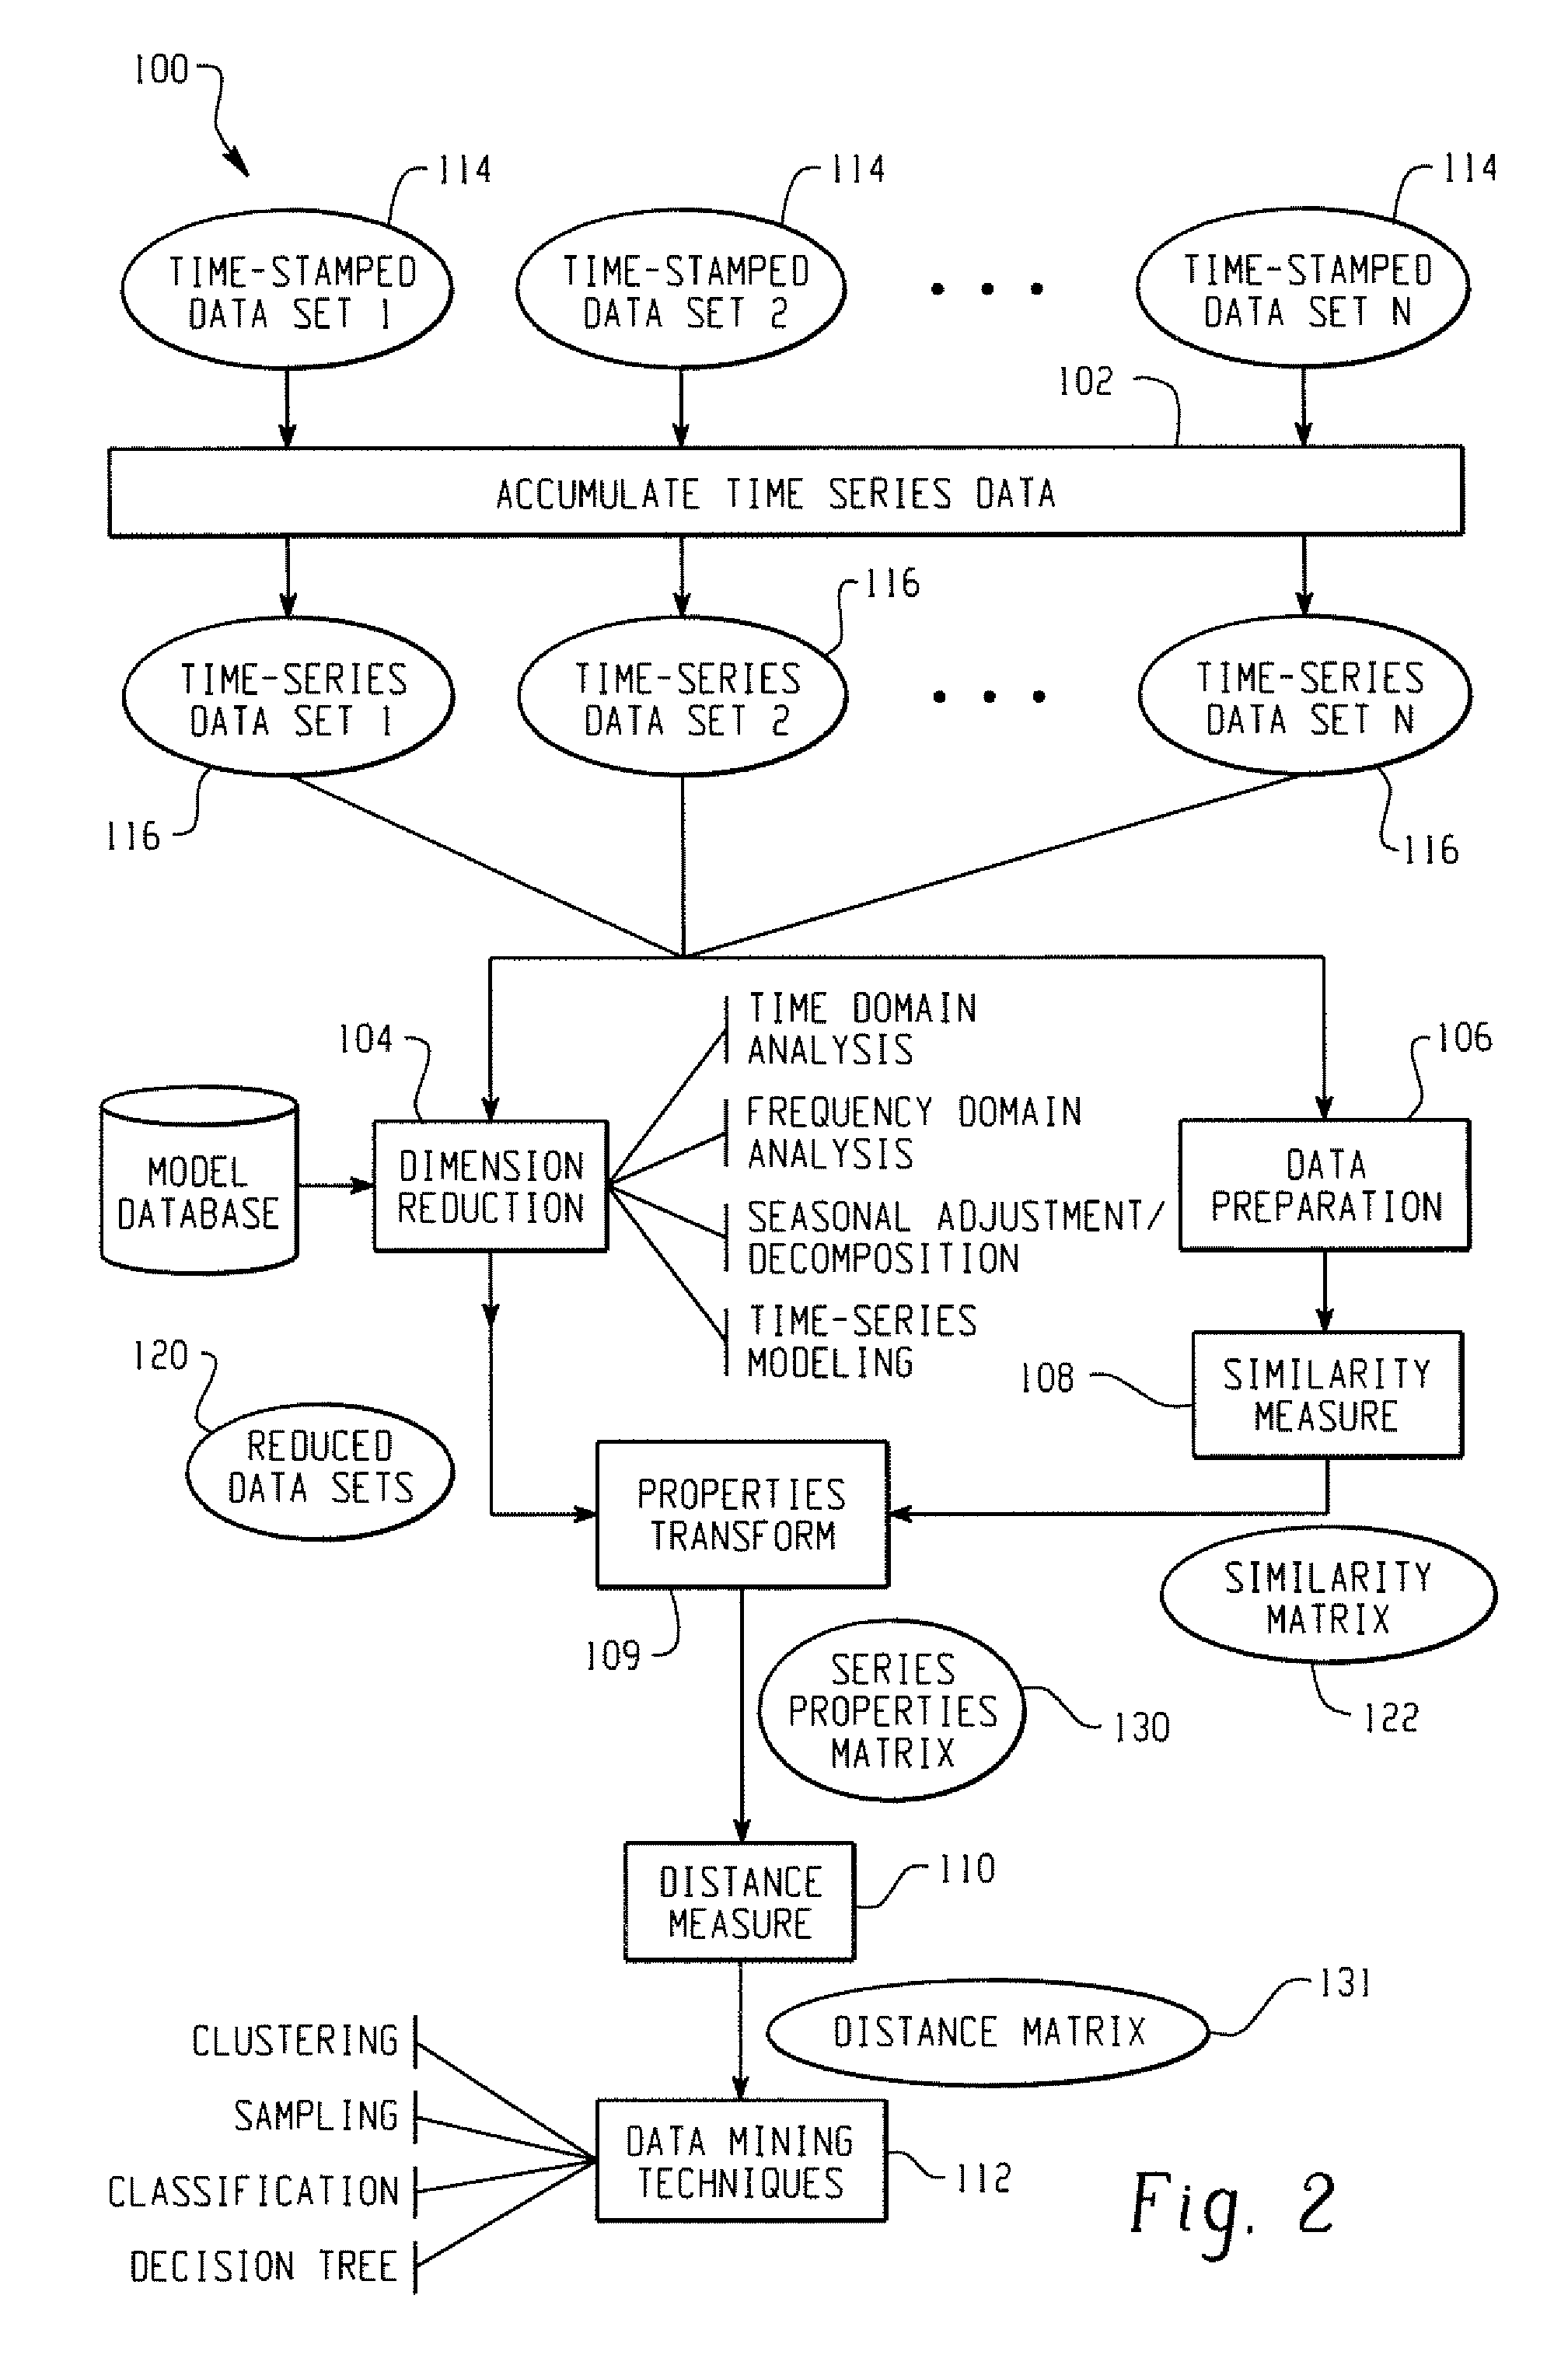 Systems and methods for mining transactional and time series data